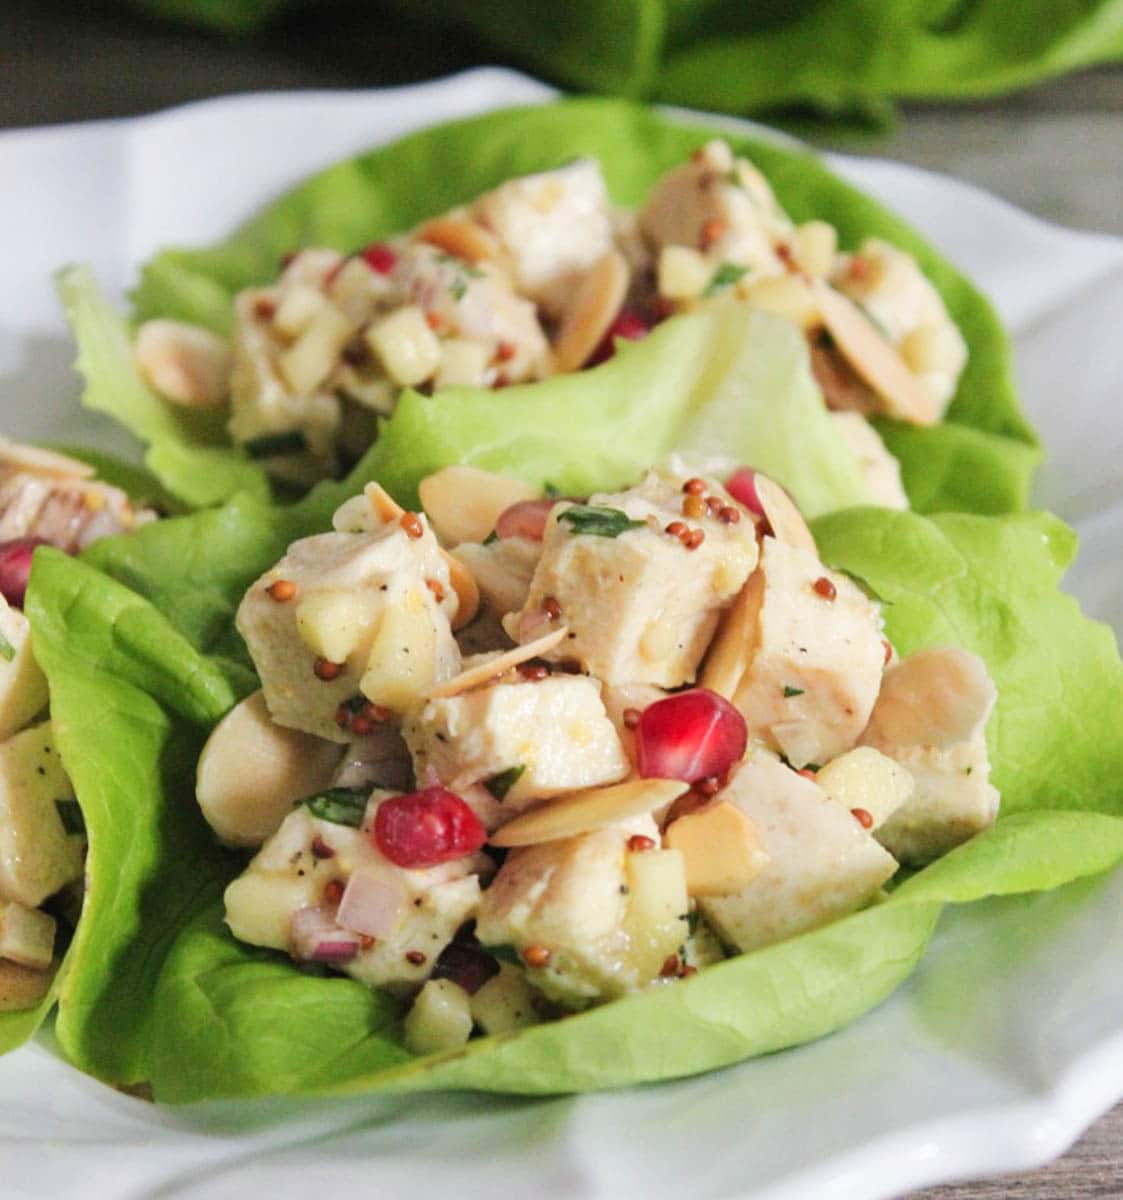 lemon-dijon-chicken-salad-with-pomegranate-apples-toasted-almonds-9